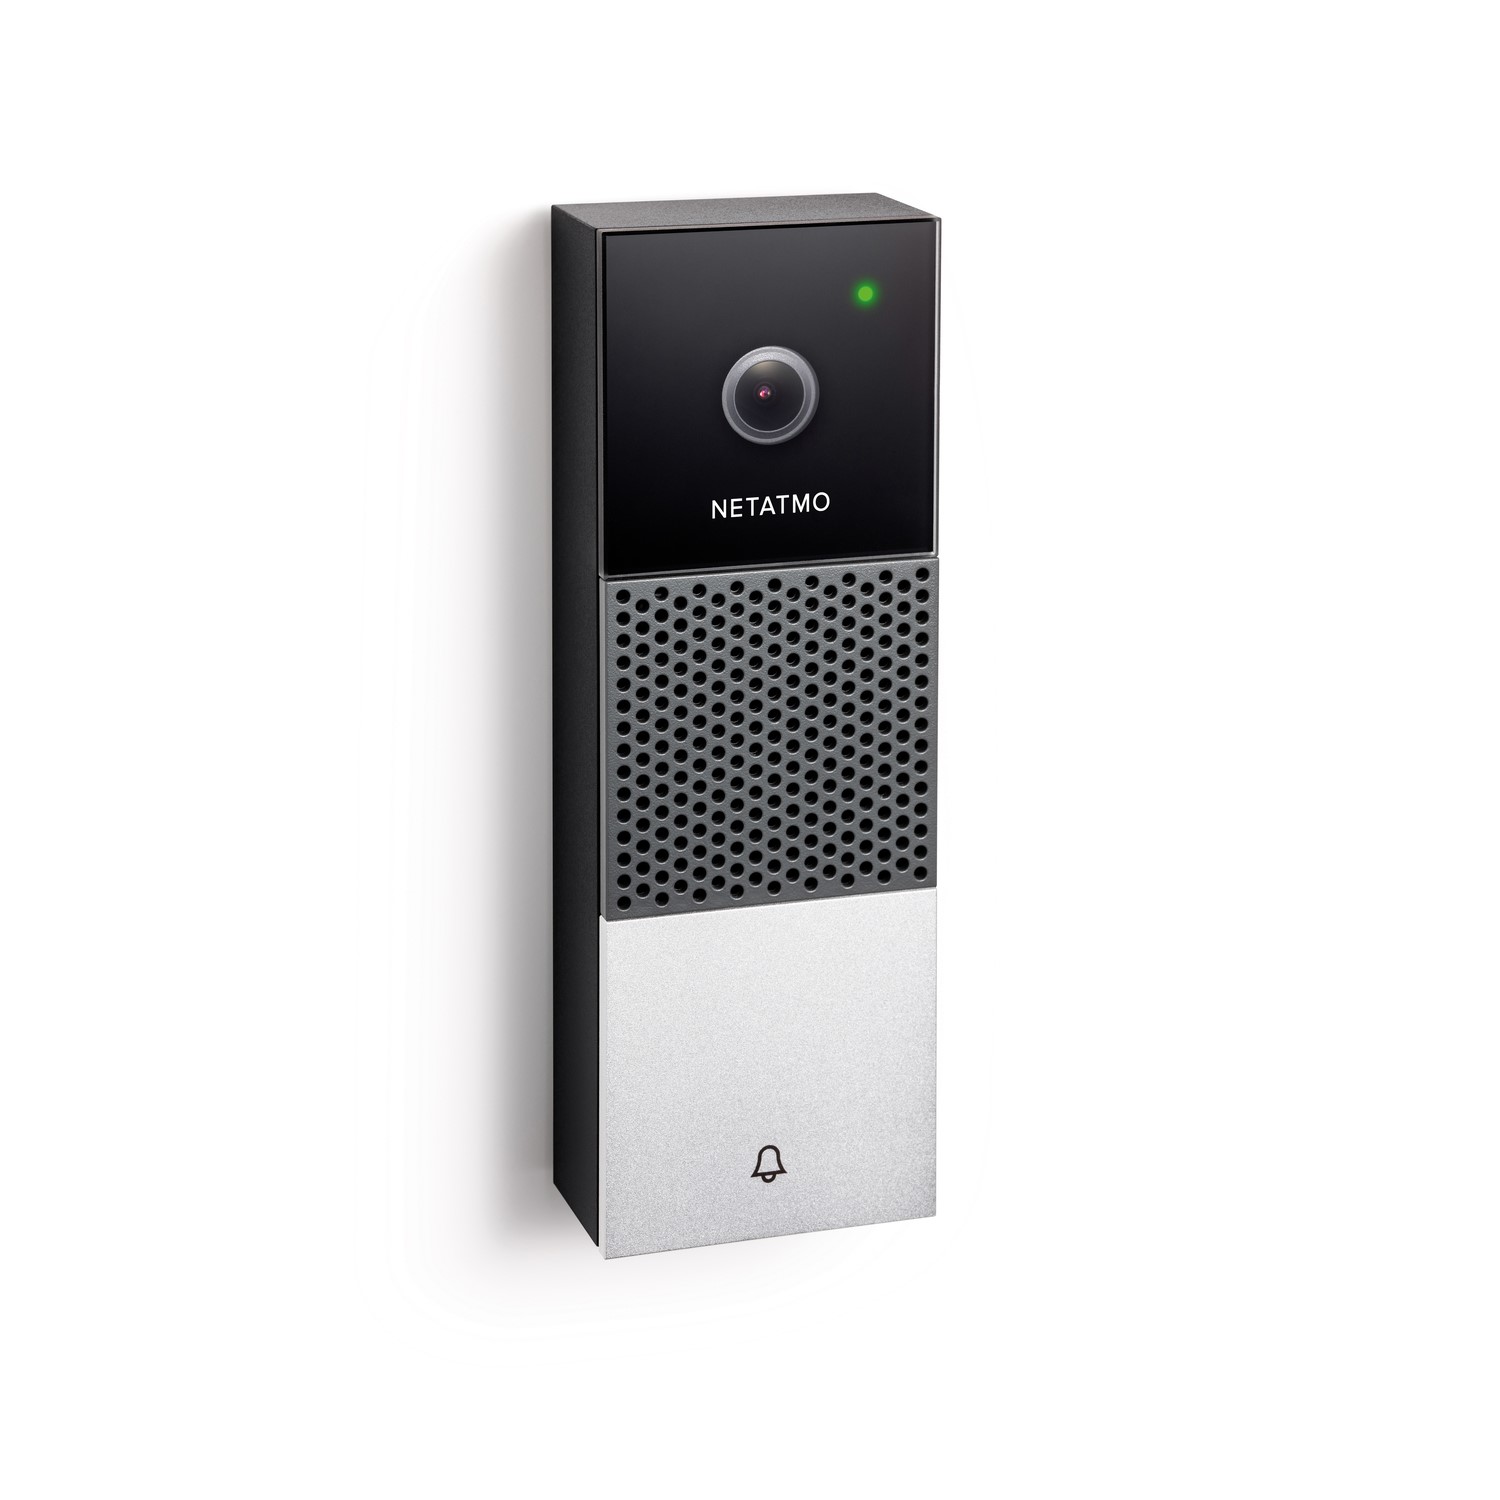 Netatmo Full 1080p HD Smart Video Doorbell - compatible with iOS & Android